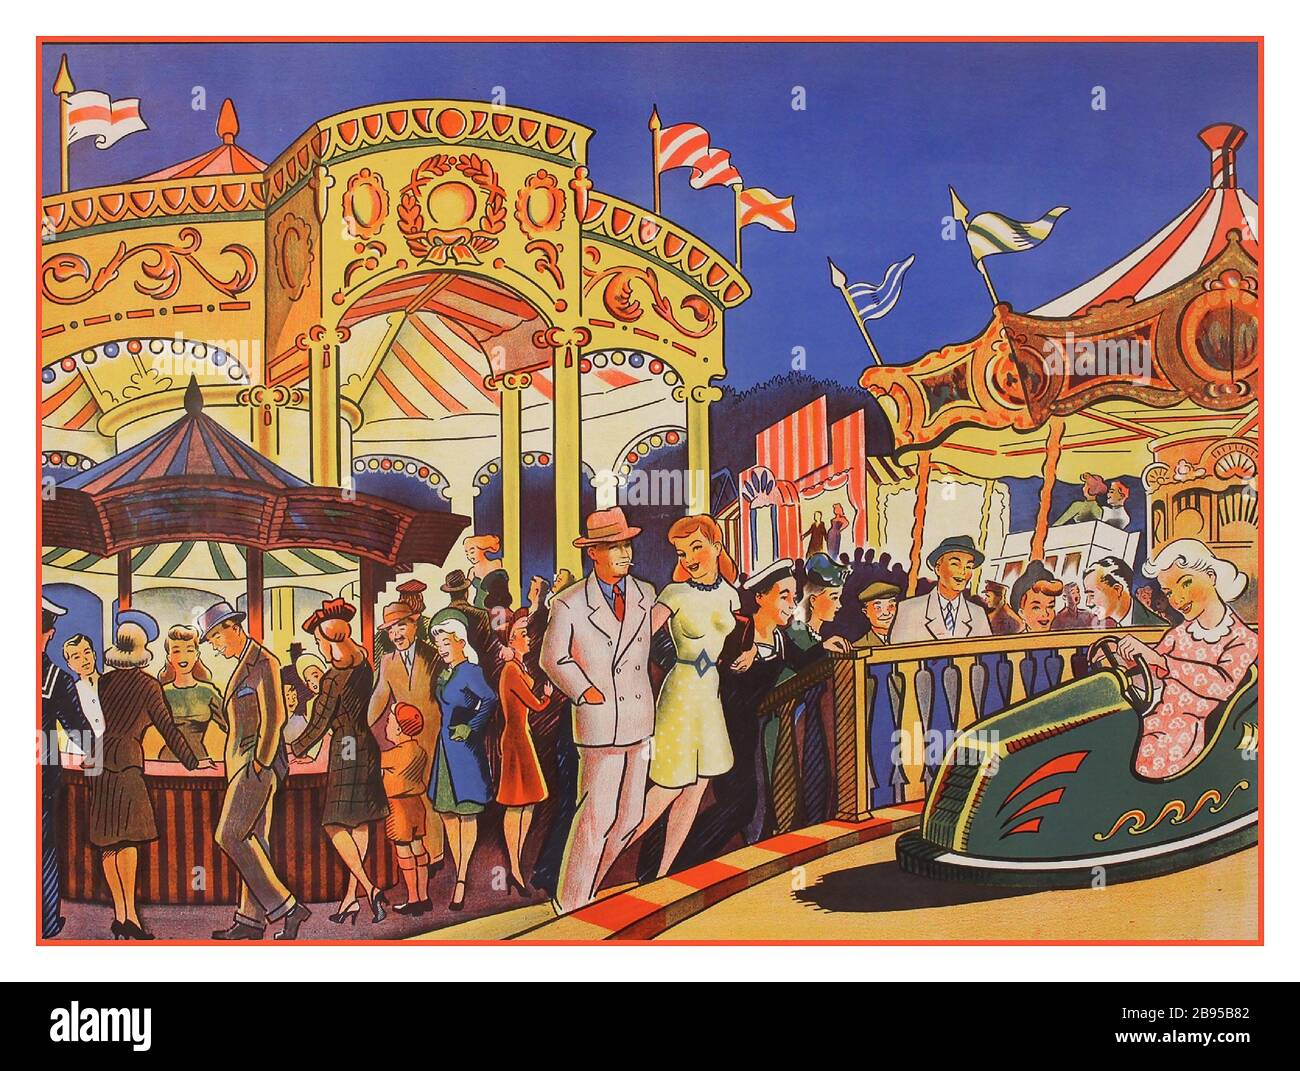 Vintage British outdoor entertainment 'The Fun Fair', illustration poster printed by Willsons Show Printers c.1950 Stock Photo